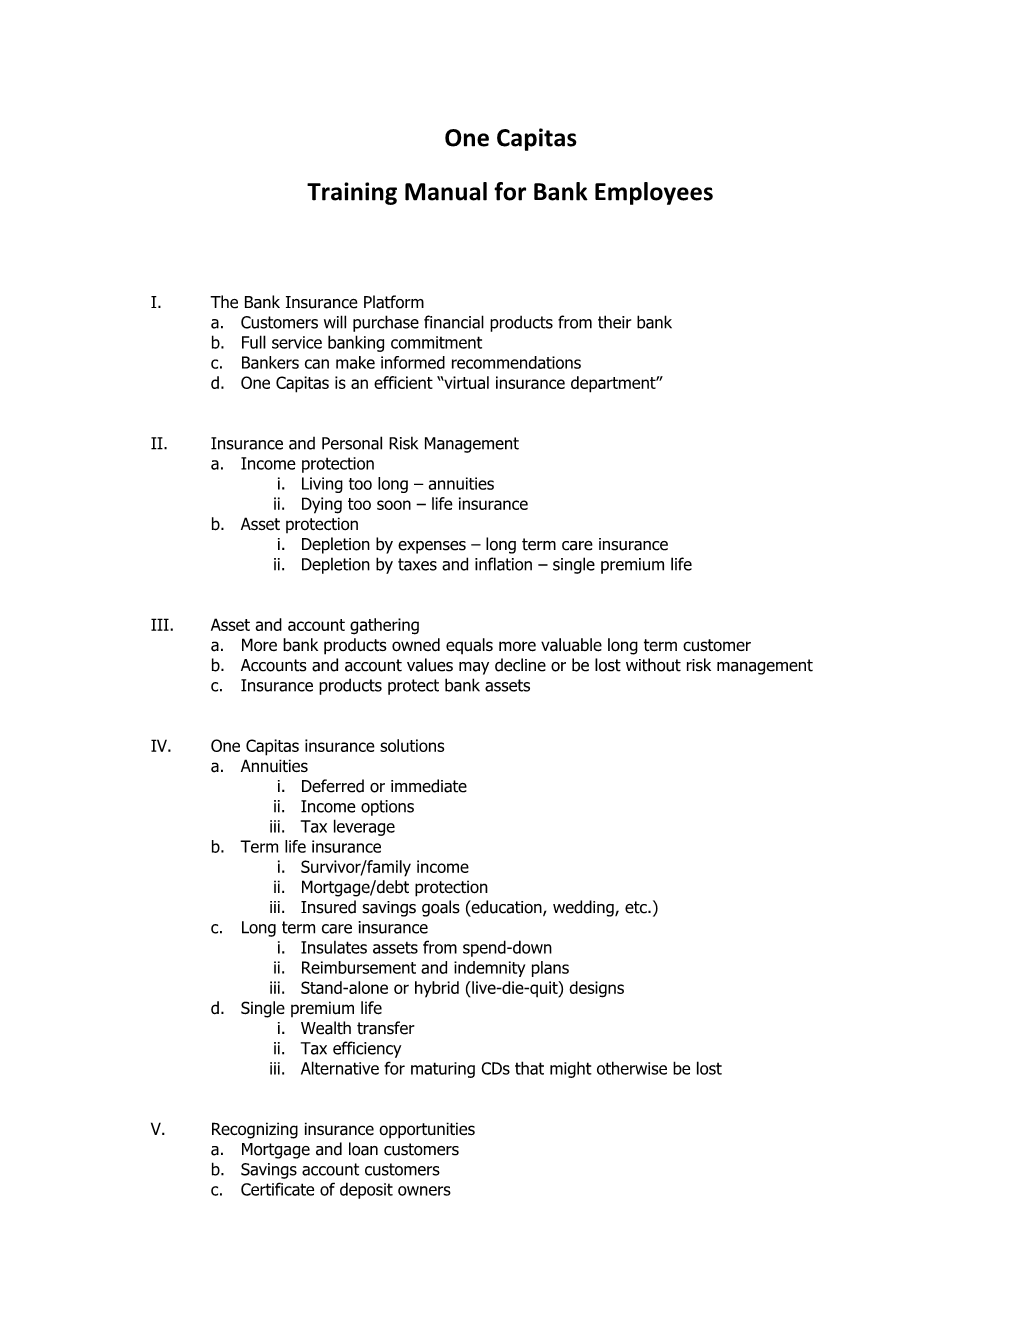 Training Manual for Bank Employees